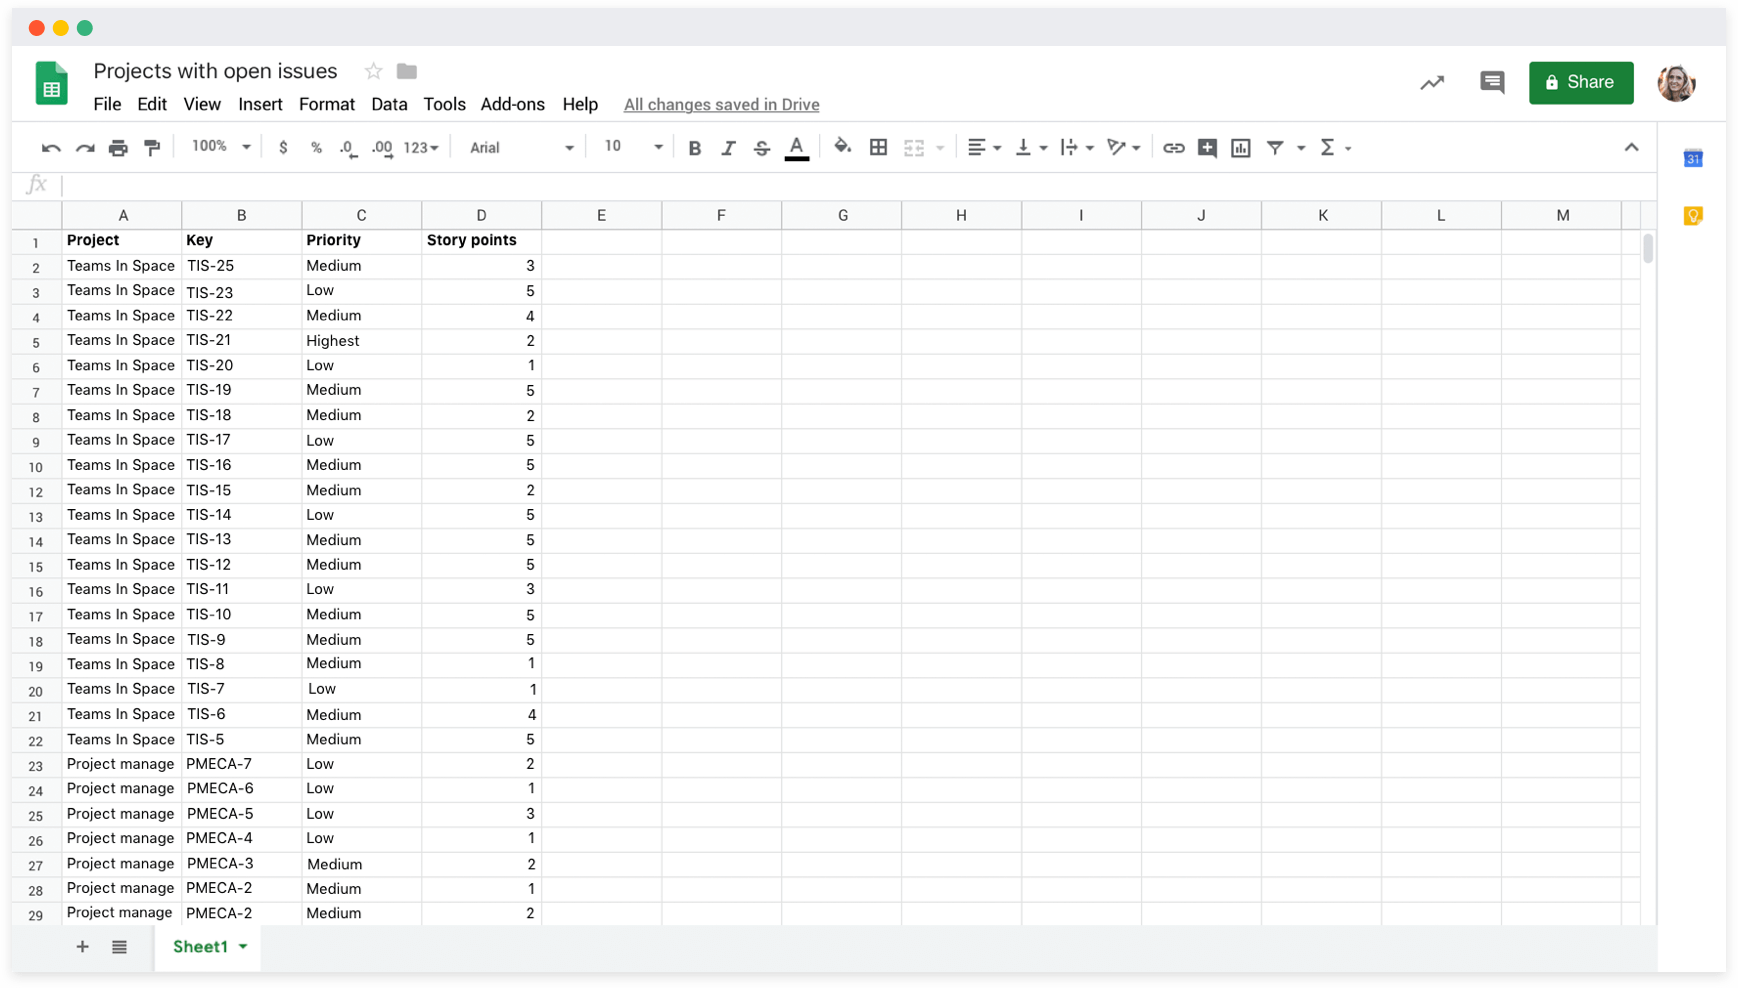 Build custom reports with Jira data in Google Sheets